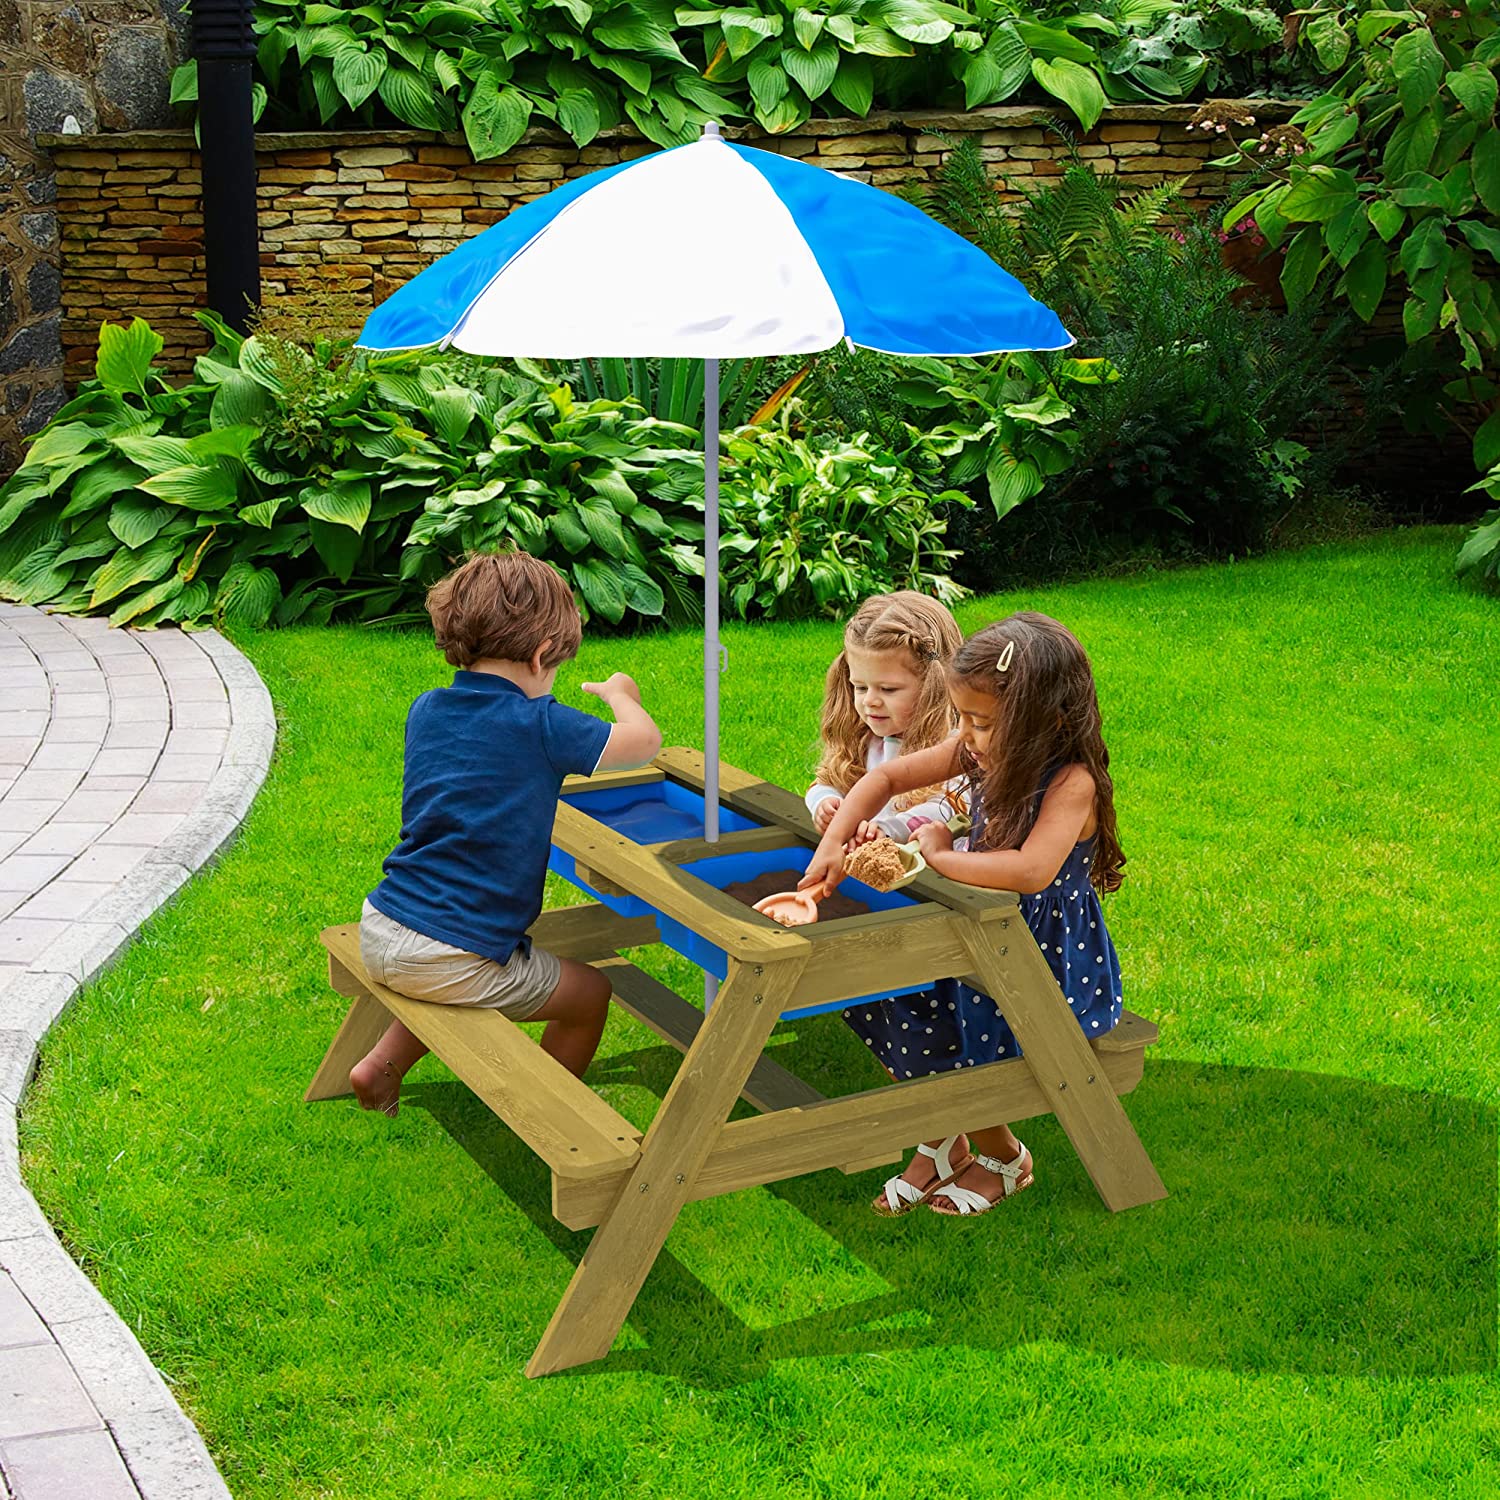 Wooden Sand & Water Bench | With Parasol | Garden and Outdoor Furniture Picnic Table with Sunshade | For 4 Kids | Age 2